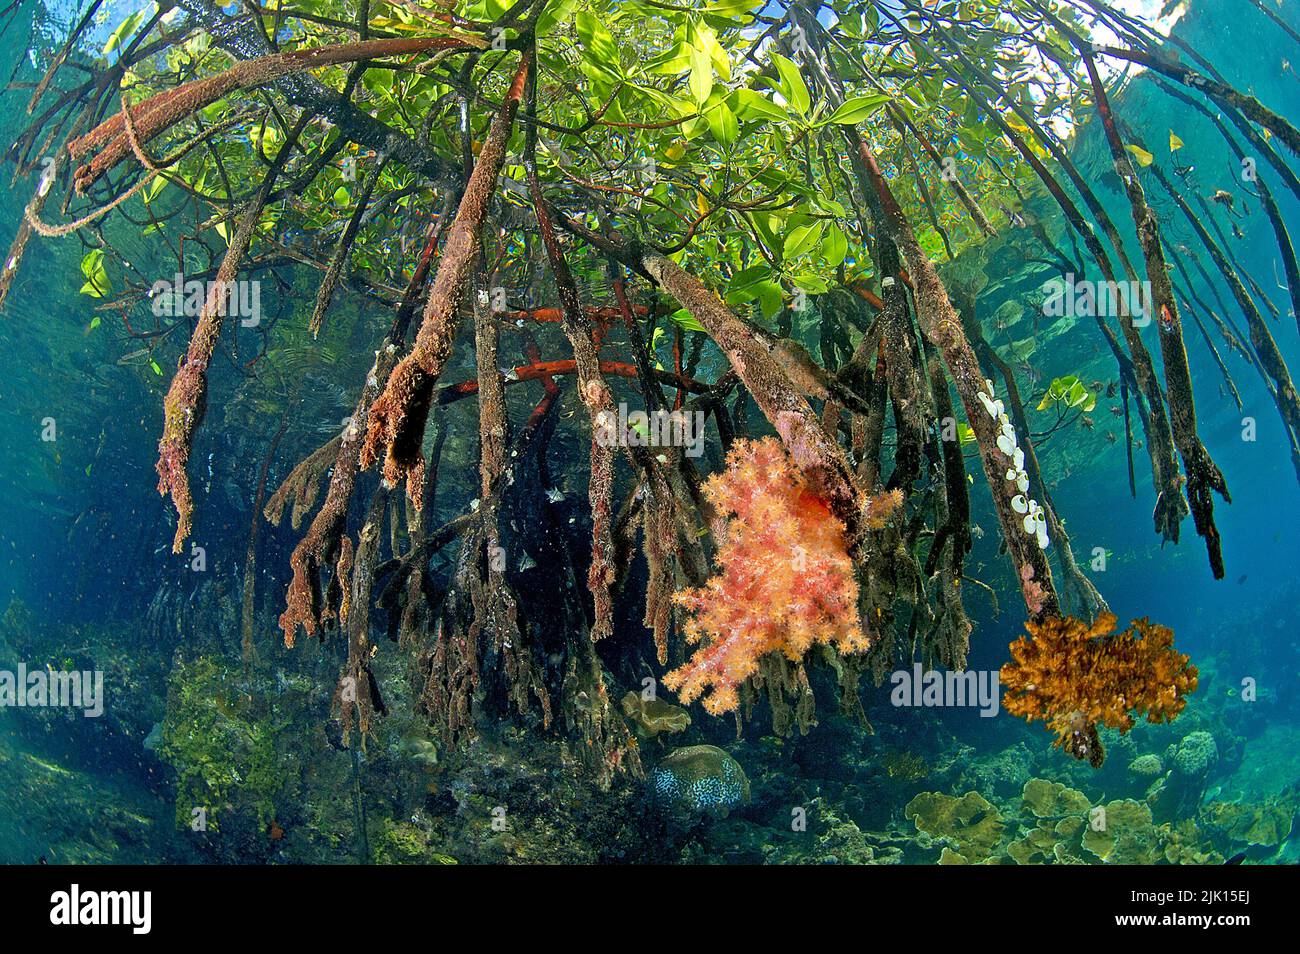 Red Mangroves (Rhizophora mangle), overgrown with Soft corals (Dendronephthya sp.), Mangroves are protected worldwide, Russel islands, Solomon islands Stock Photo